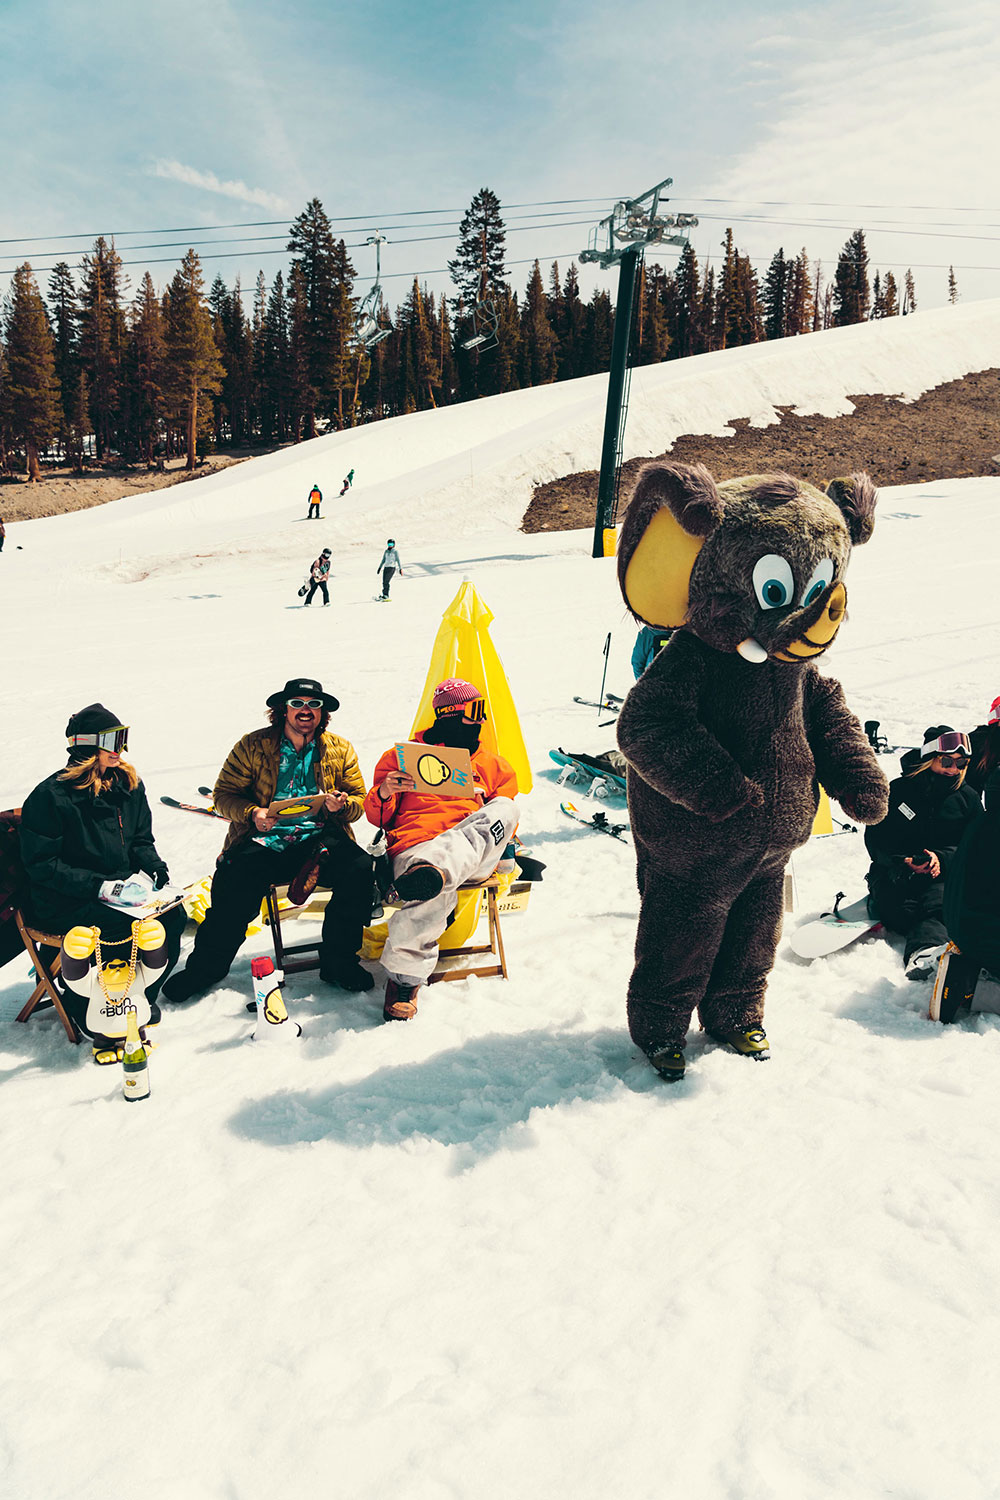 Bum Rush by Sun Bum at Mammoth Mountain, California with mascot Woolly and judges